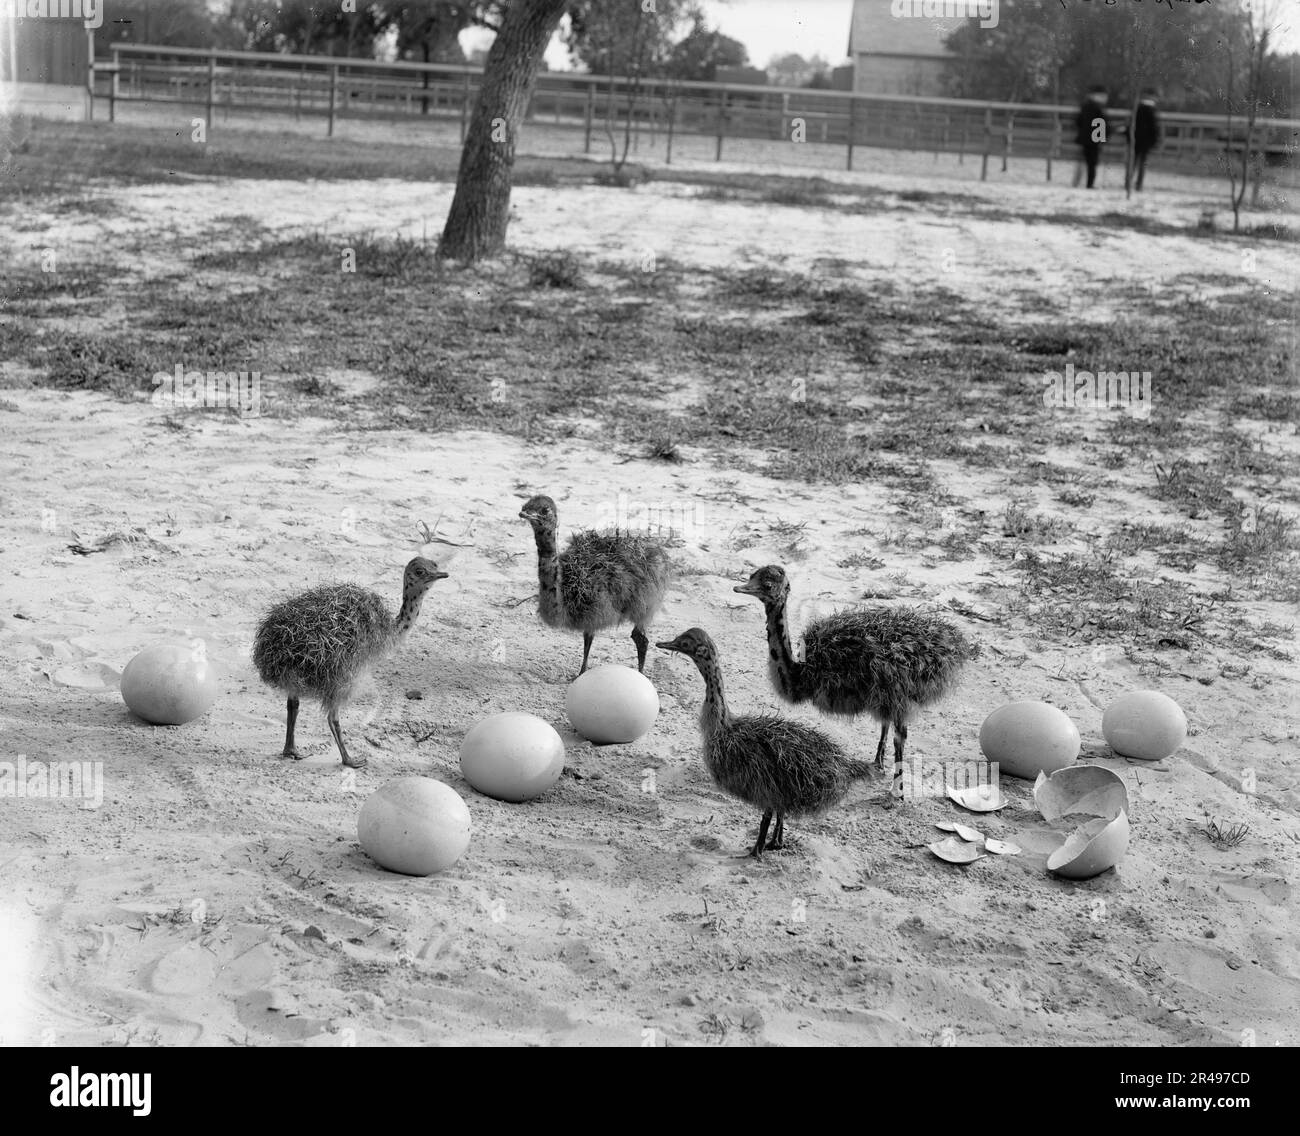 Ostrich farm, Hot Springs, Ark., between 1880 and 1930. Stock Photo